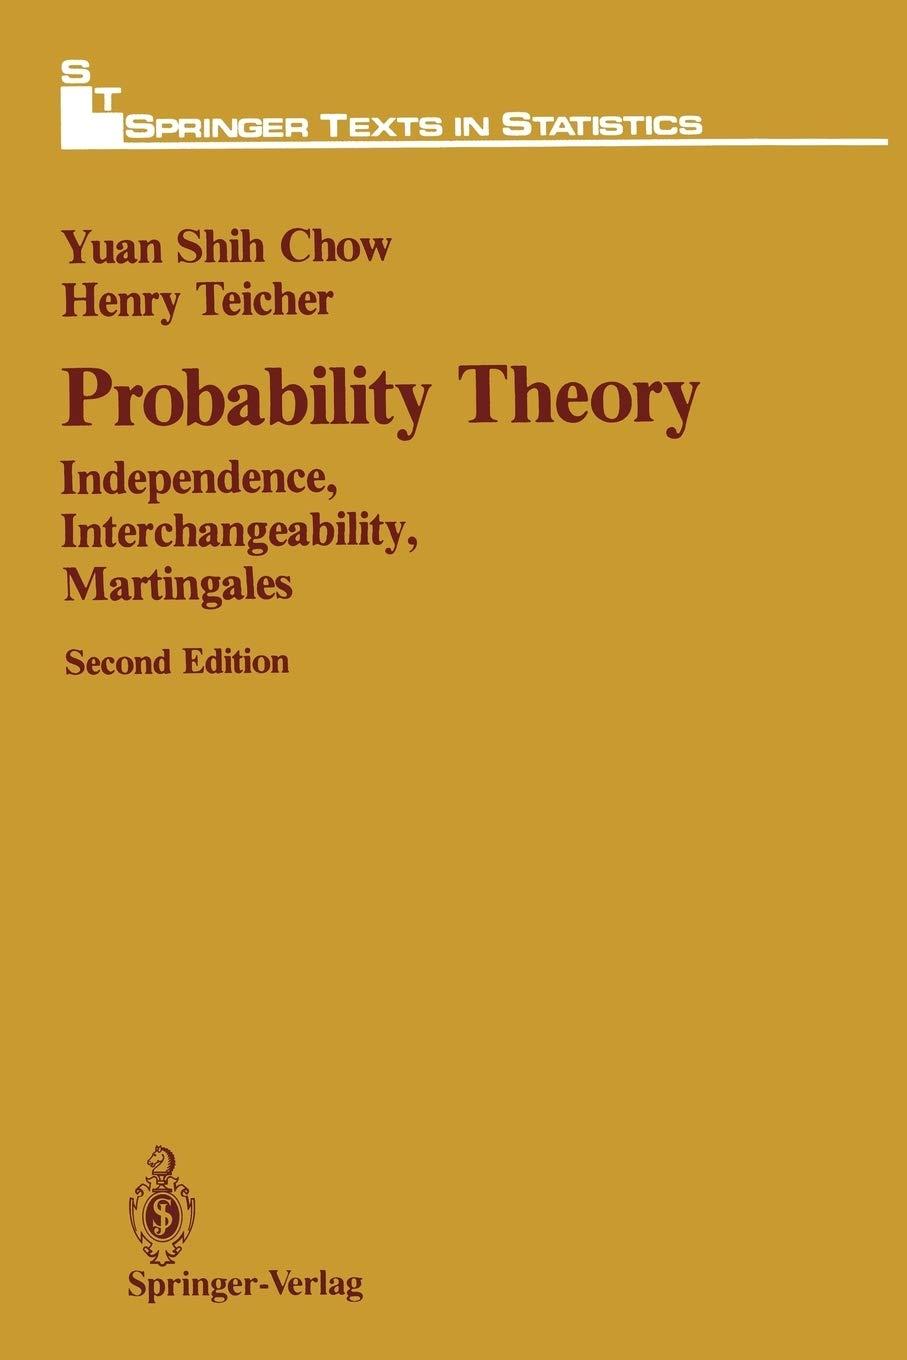 probability theory independence interchangeability martingales 2nd edition yuan s. chow, henry teicher